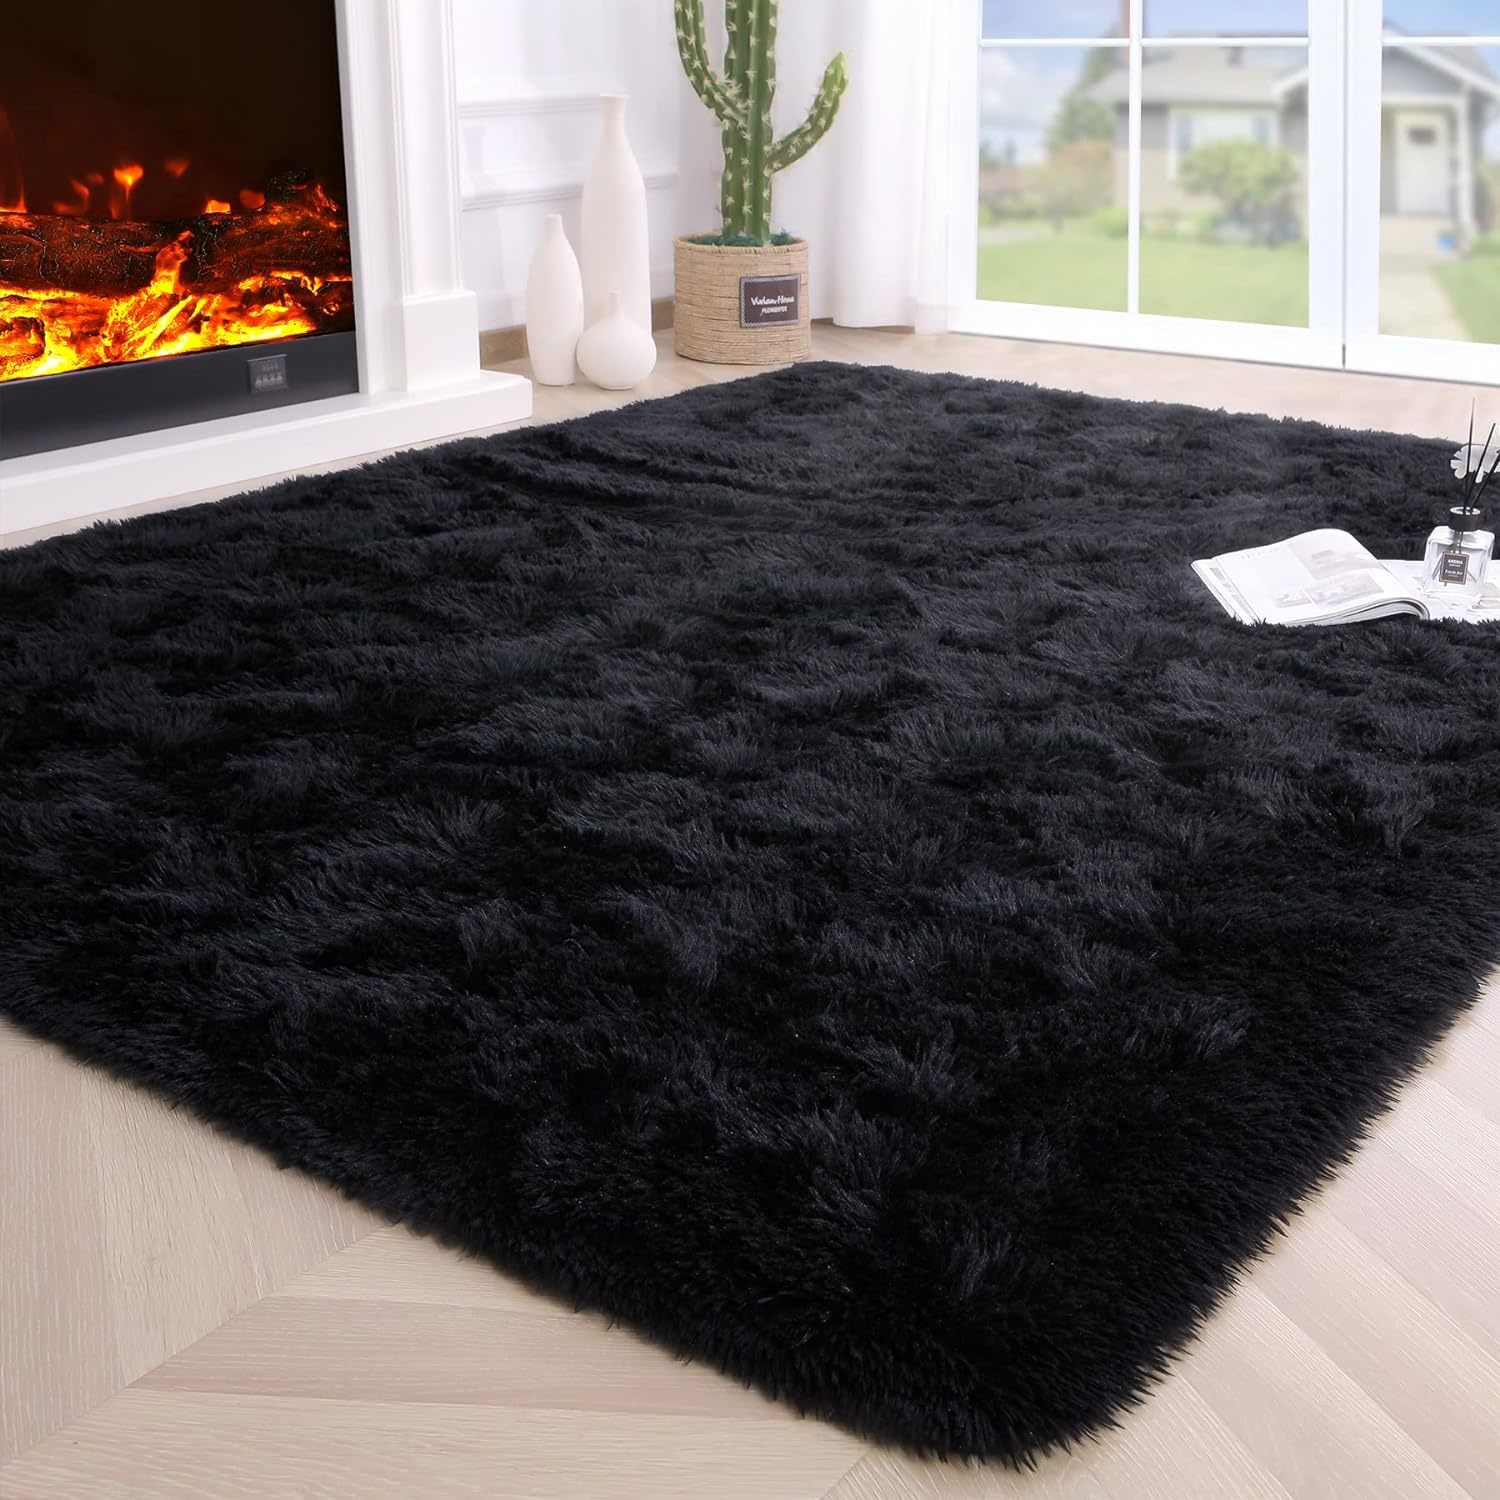 Primary image for Fluffy Bedroom Rug Carpet,4X5.3 Feet Shaggy Fuzzy Rugs For Bedroom,Soft Rug For 